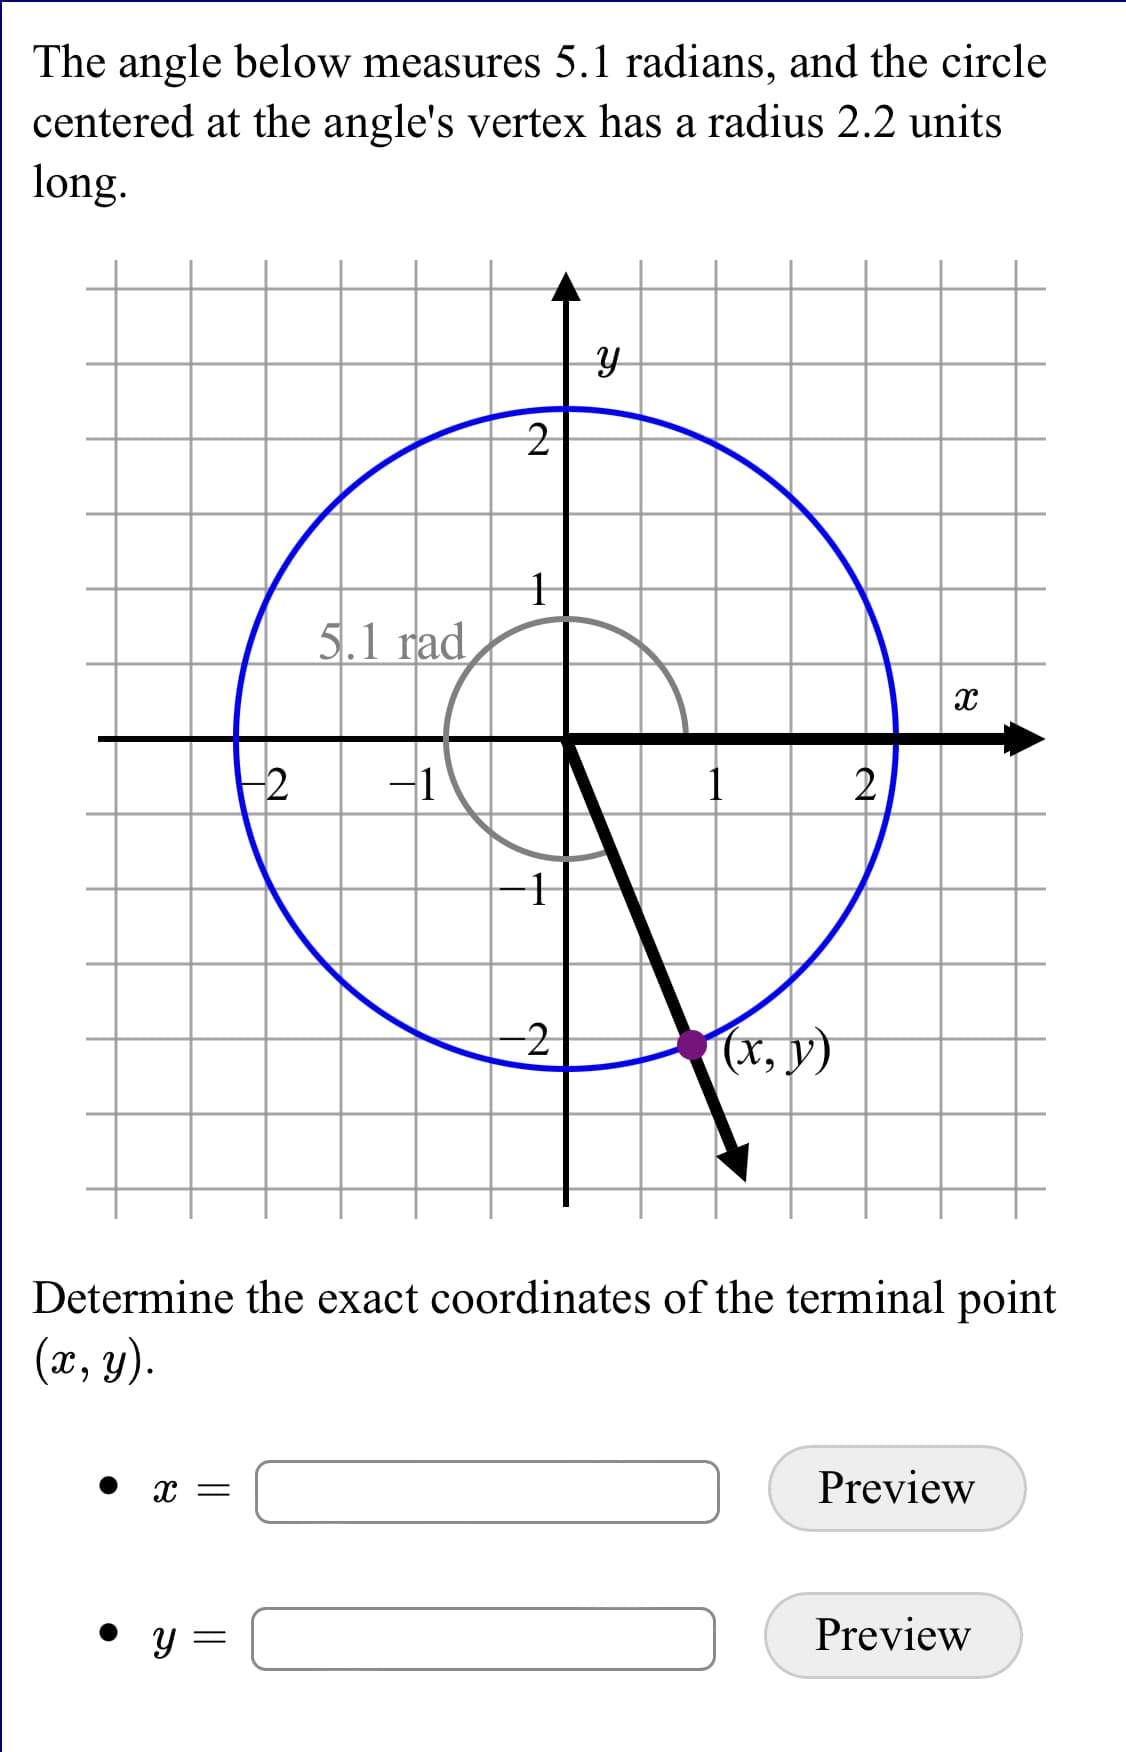 The angle below measures 5.1 radians, and the circle
centered at the angle's vertex has a radius 2.2 units
long.
5.1 rad
-1
2
(x, y)
Determine the exact coordinates of the terminal point
(x, y).
Preview
Preview
